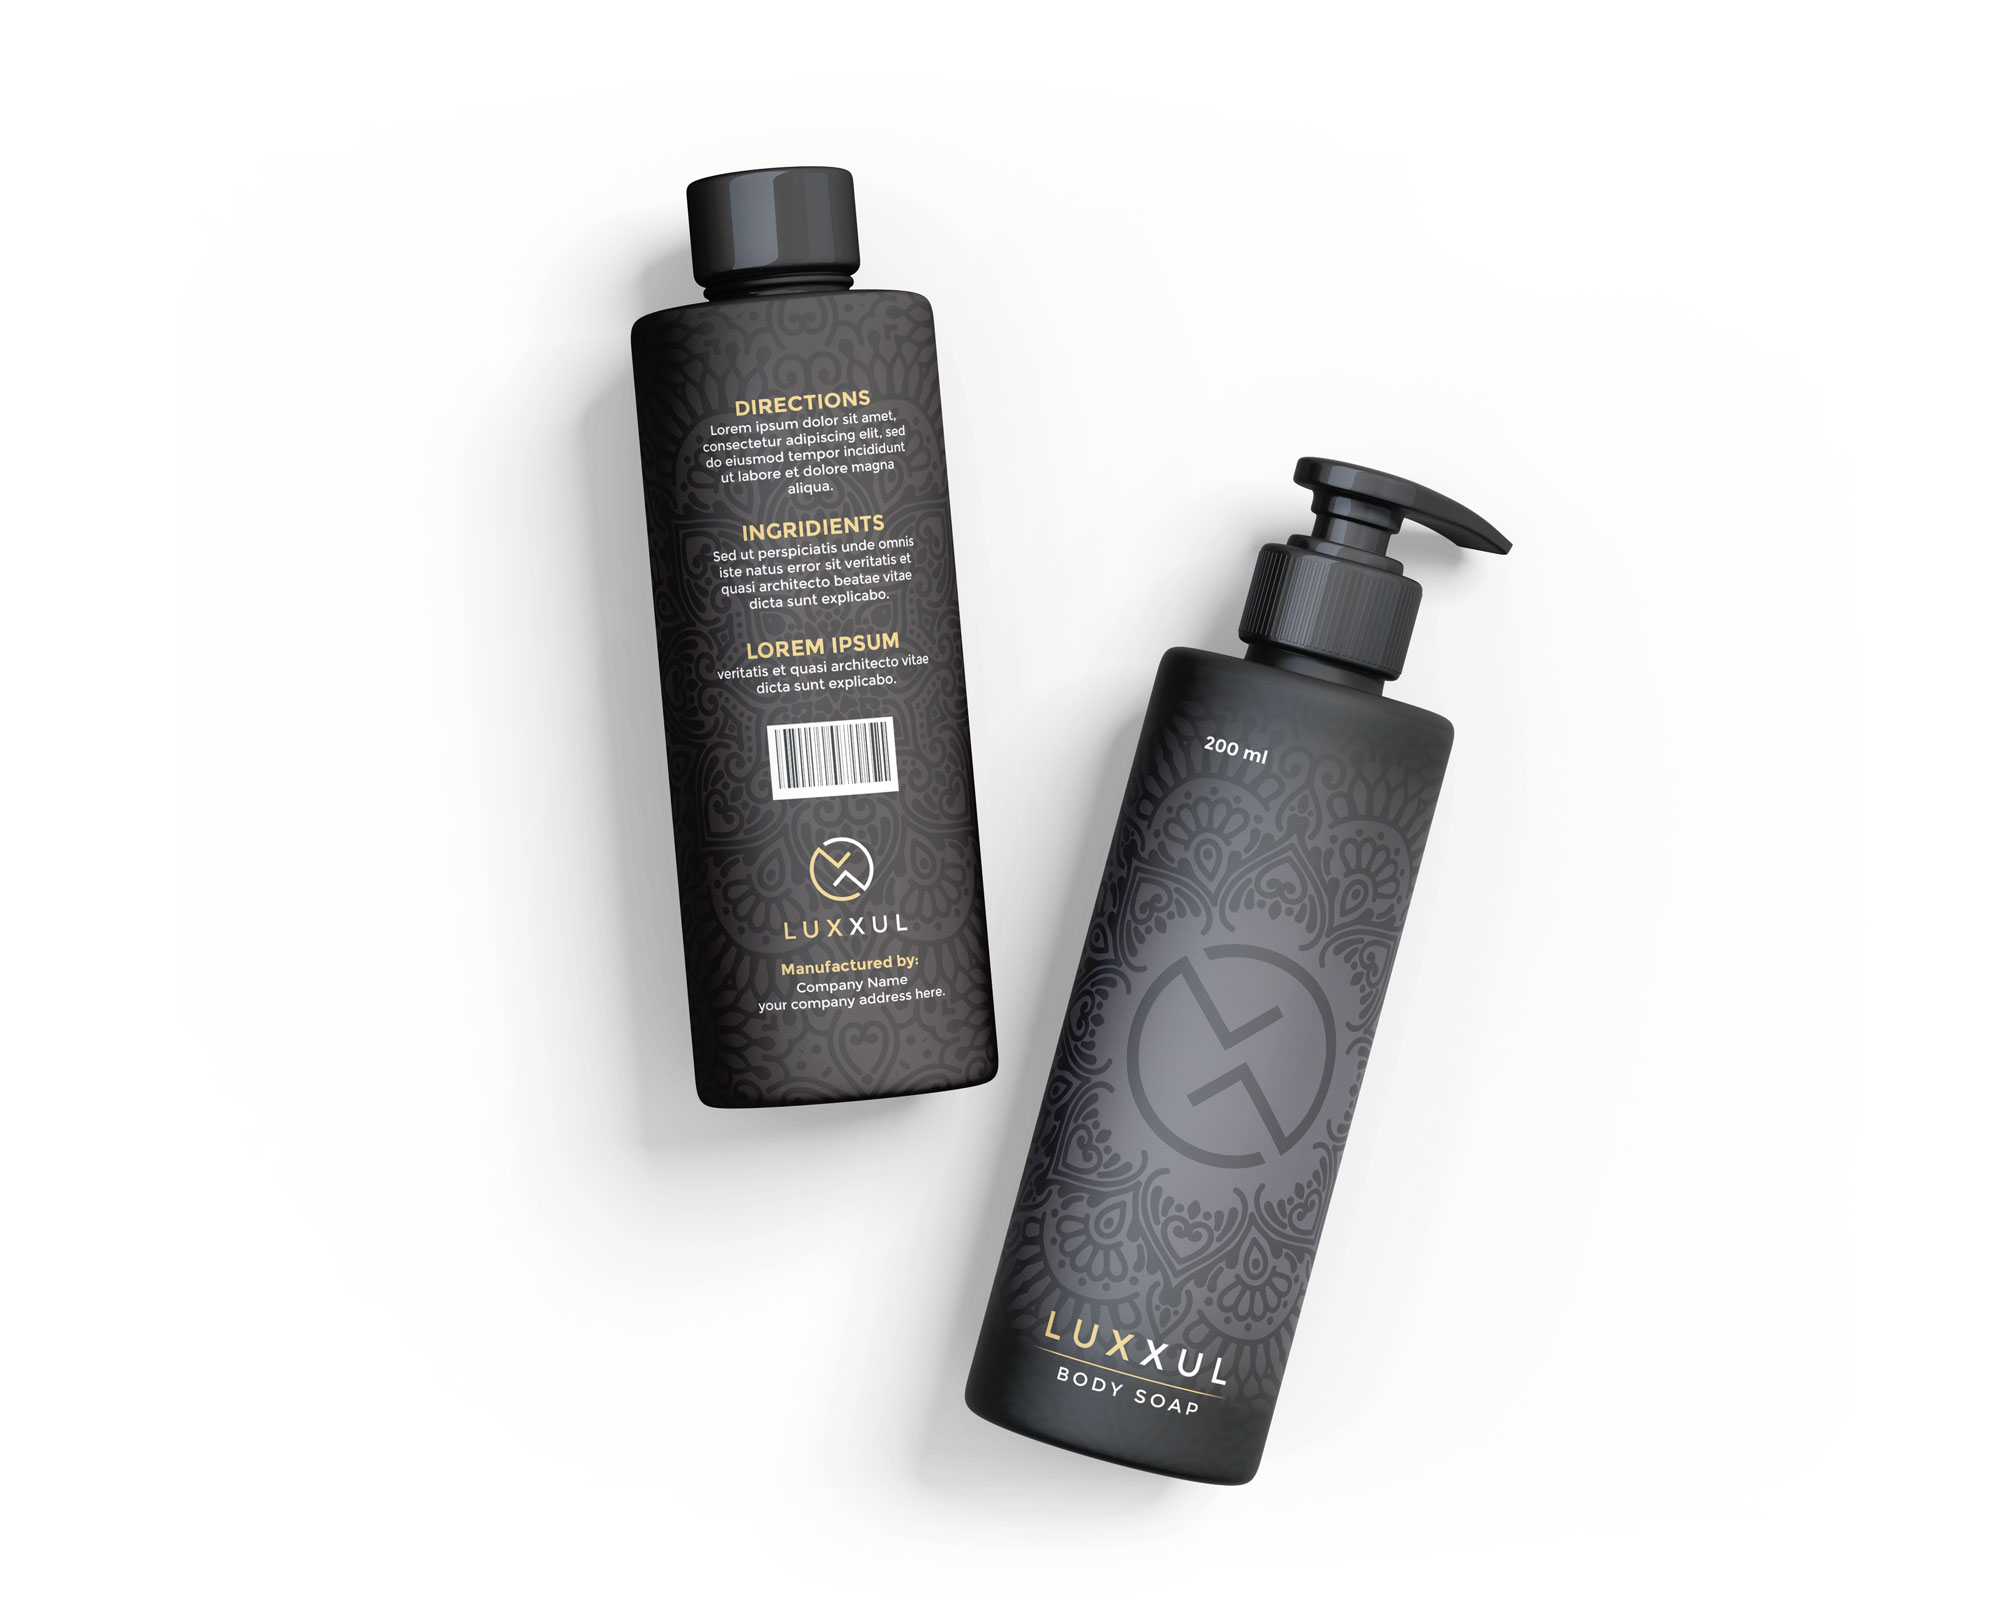 Packaging Design #209 | 'Luxxul Skin and Hair Care Products' design project  | DesignContest ®